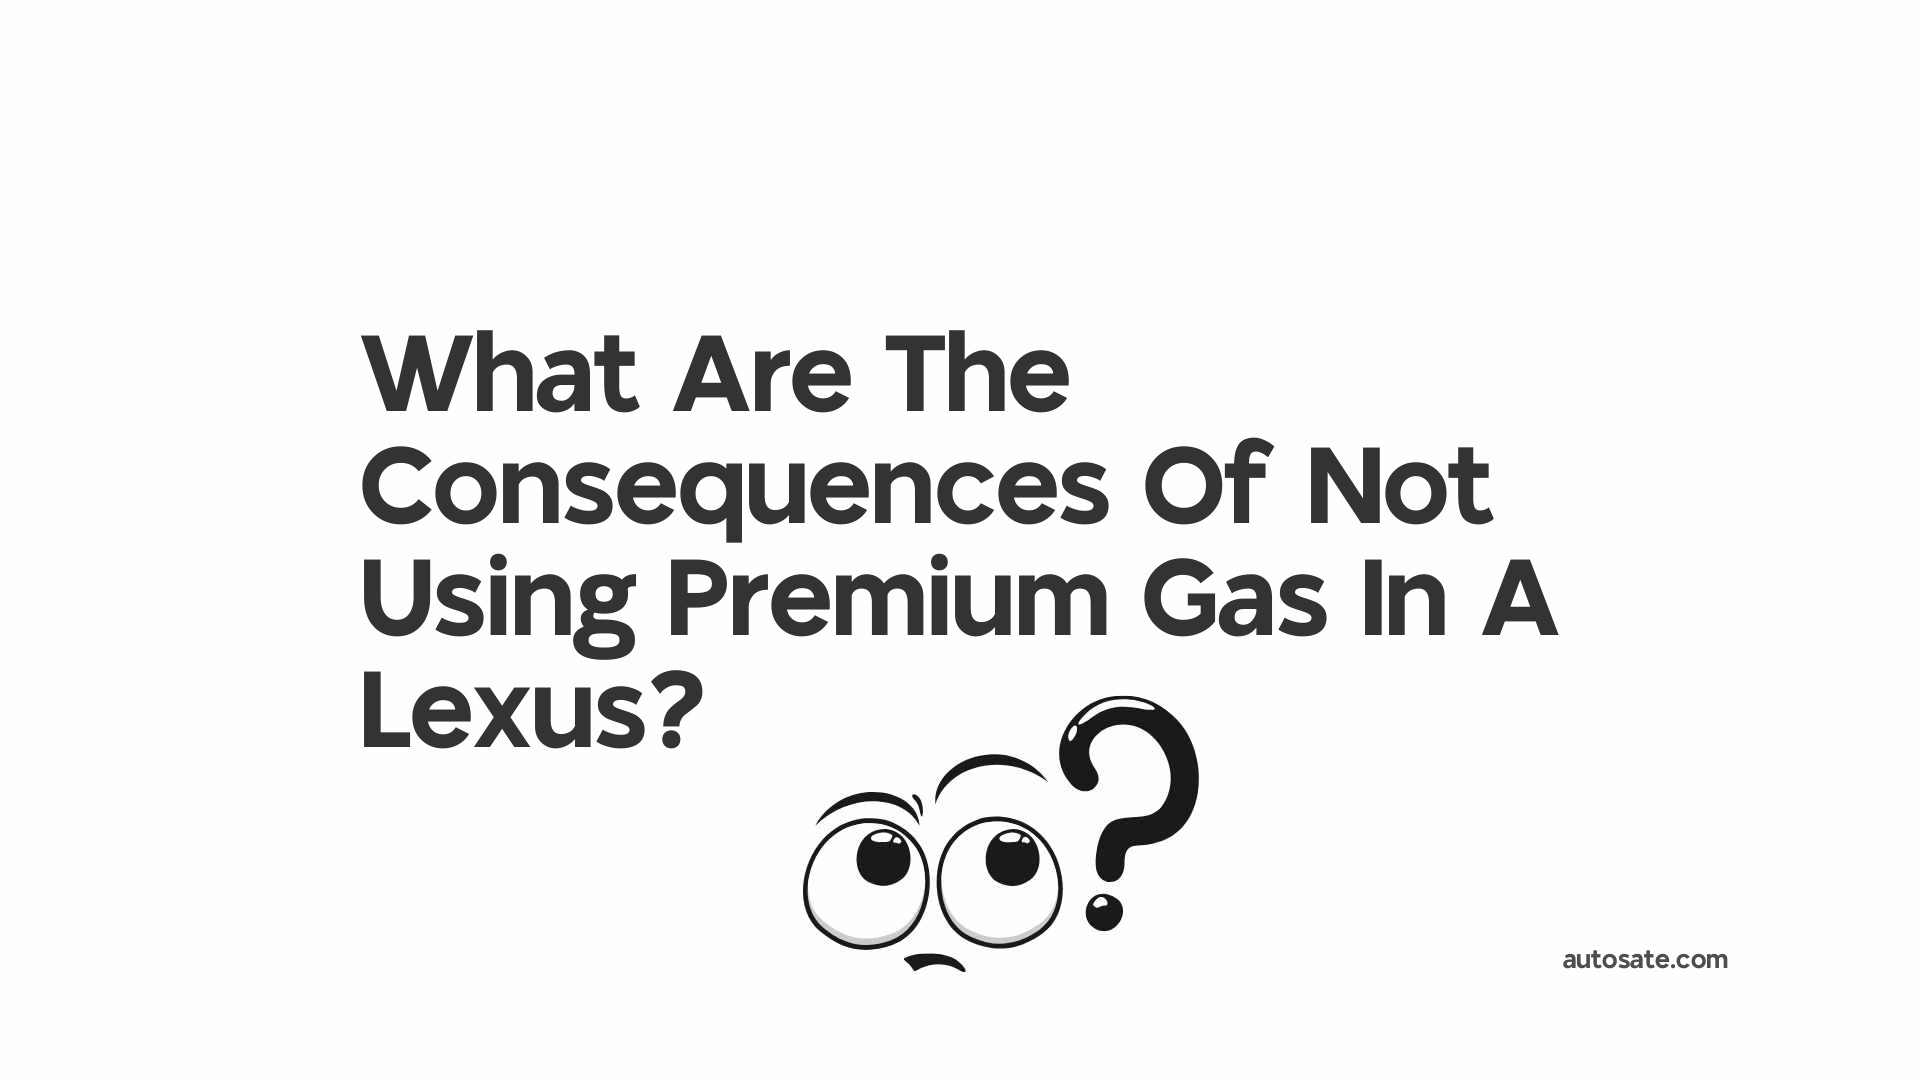 What Are The Consequences Of Not Using Premium Gas In A Lexus?